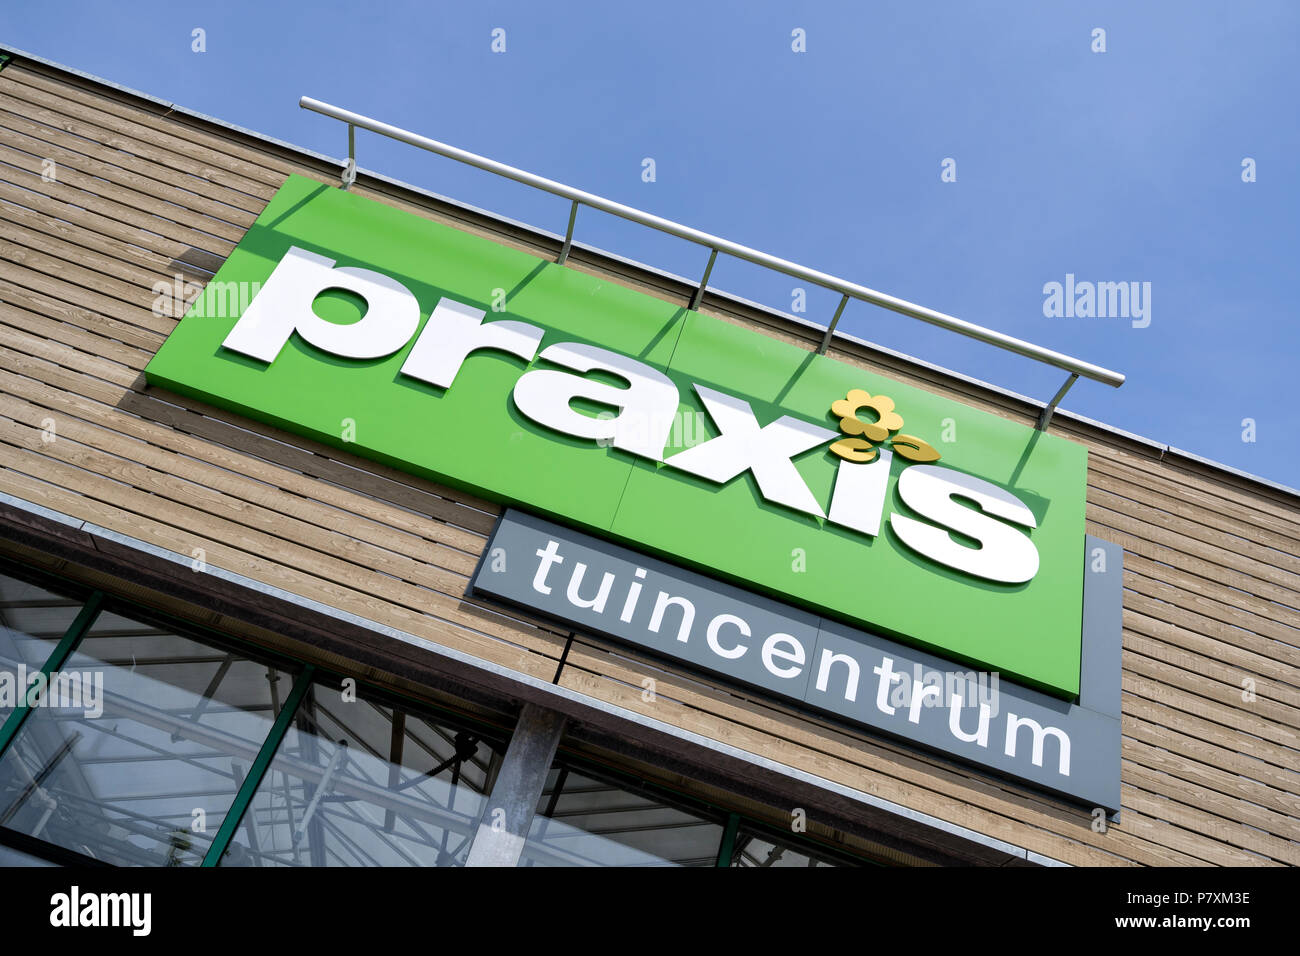 Praxis garden center sign at store. Praxis is a leading DIY brand in the  Netherlands and